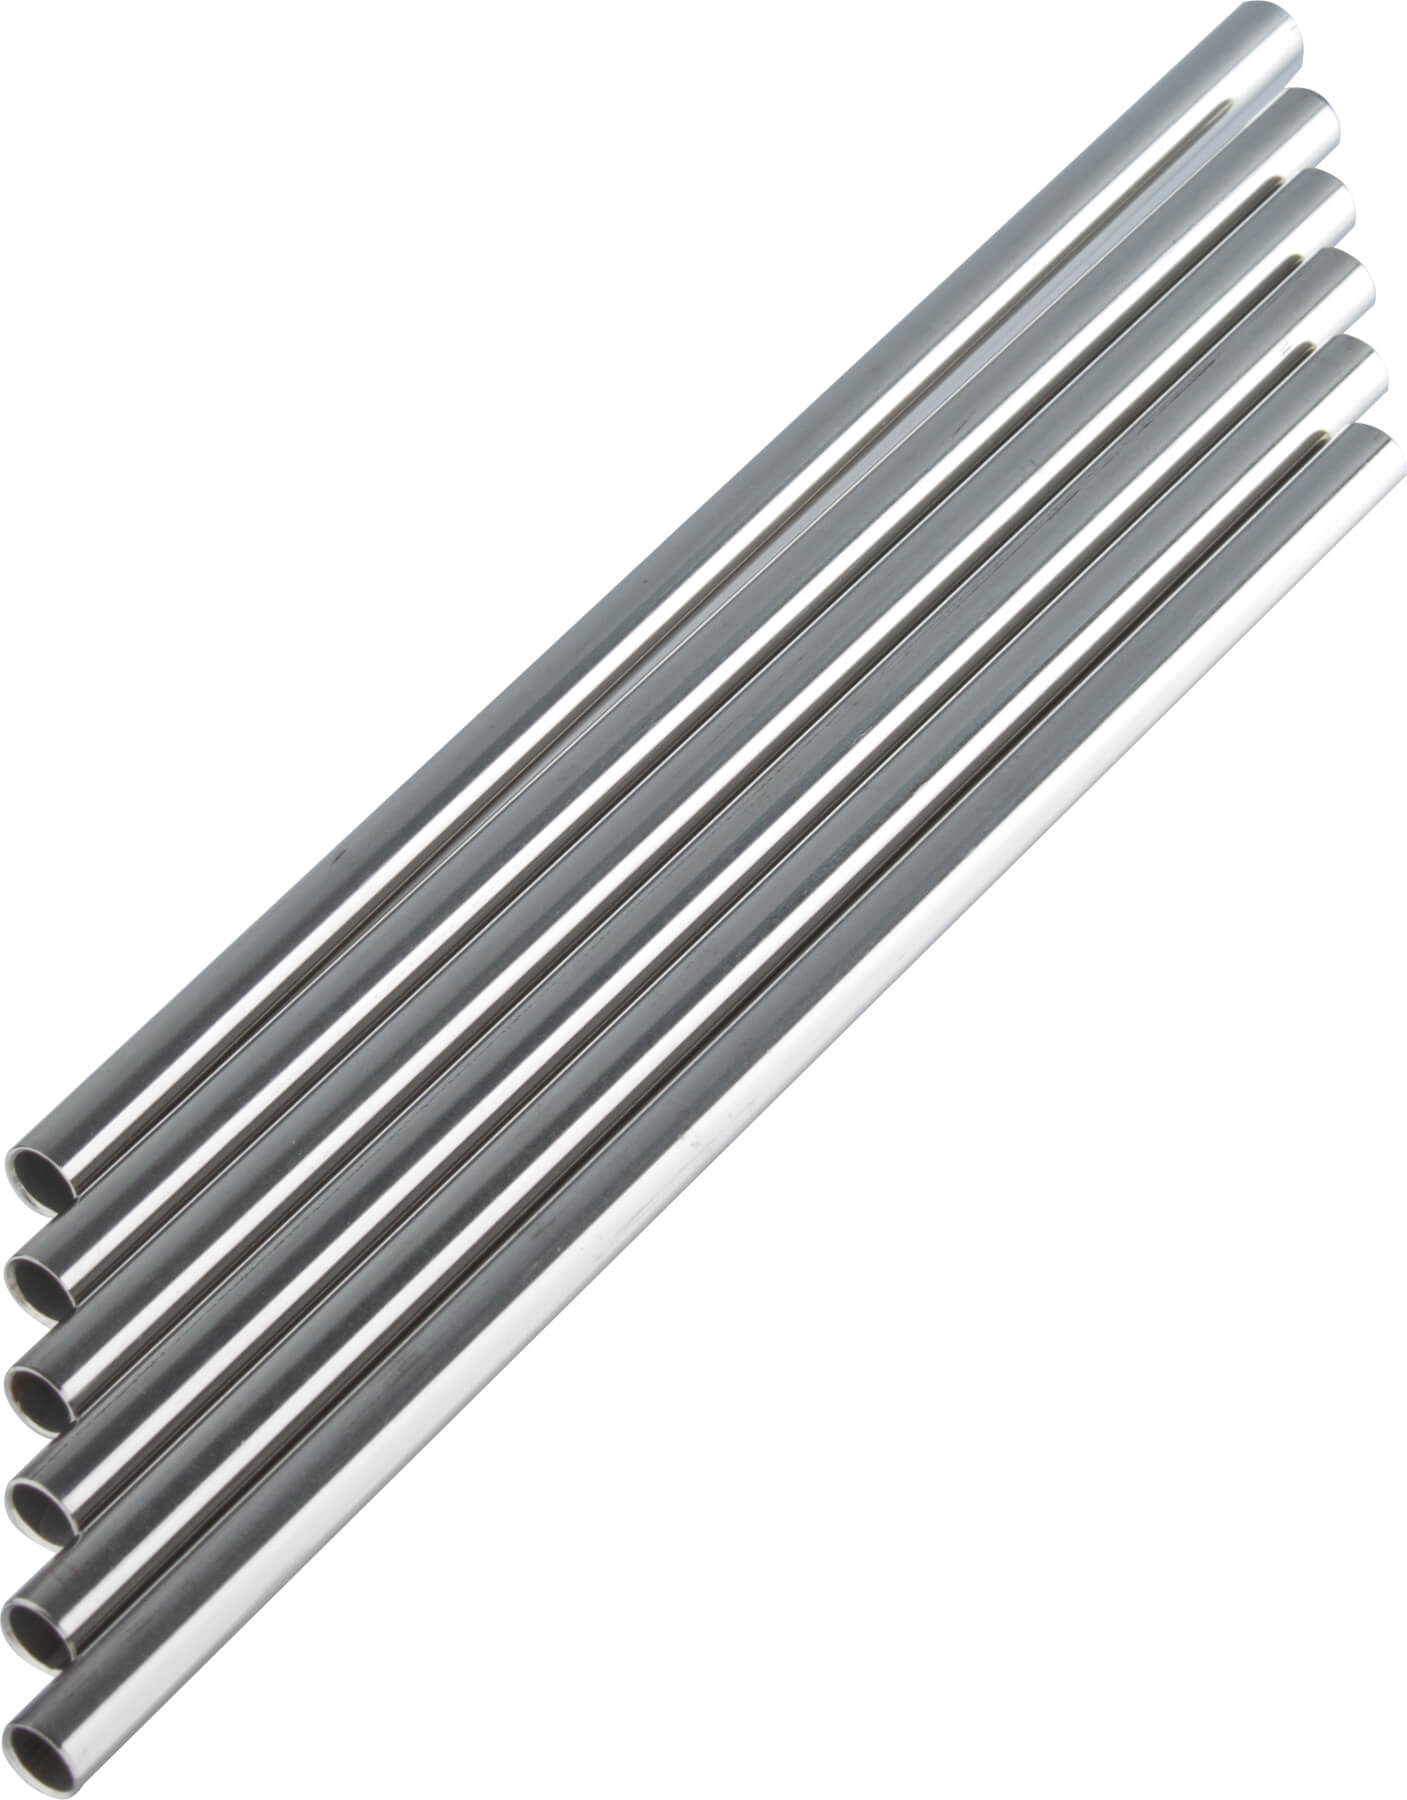 Drinking straws, stainless steel (6x150mm) - 6 pcs.